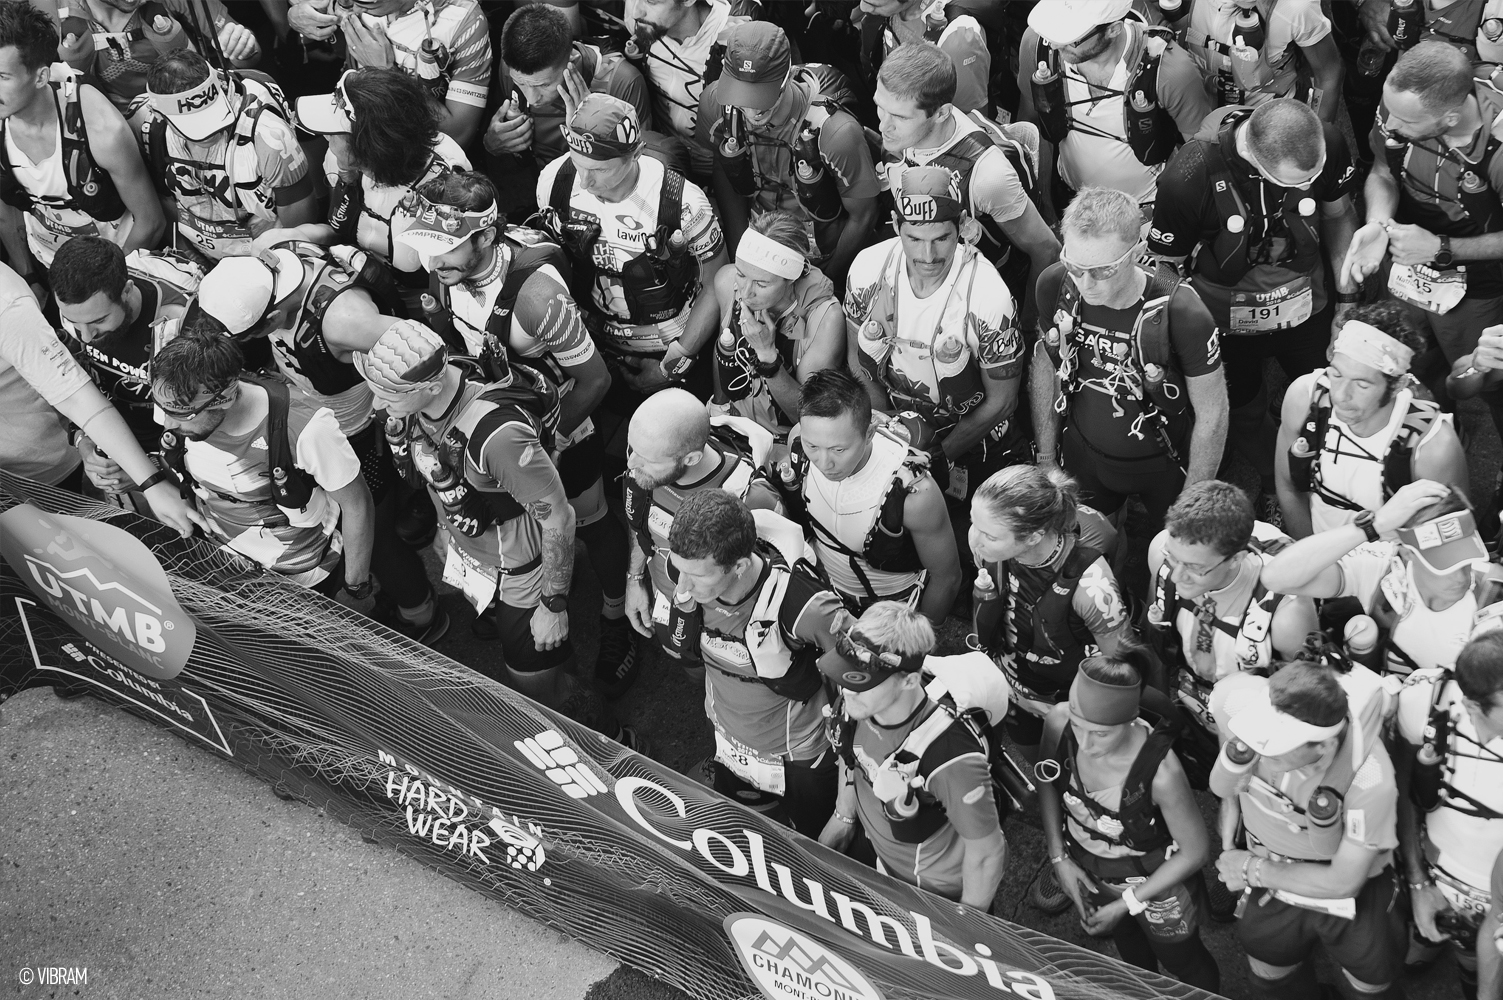 LET’S GET BACK TO UTMB 2016 – INTERVIEW WITH GEDIMINAS GRINIUS